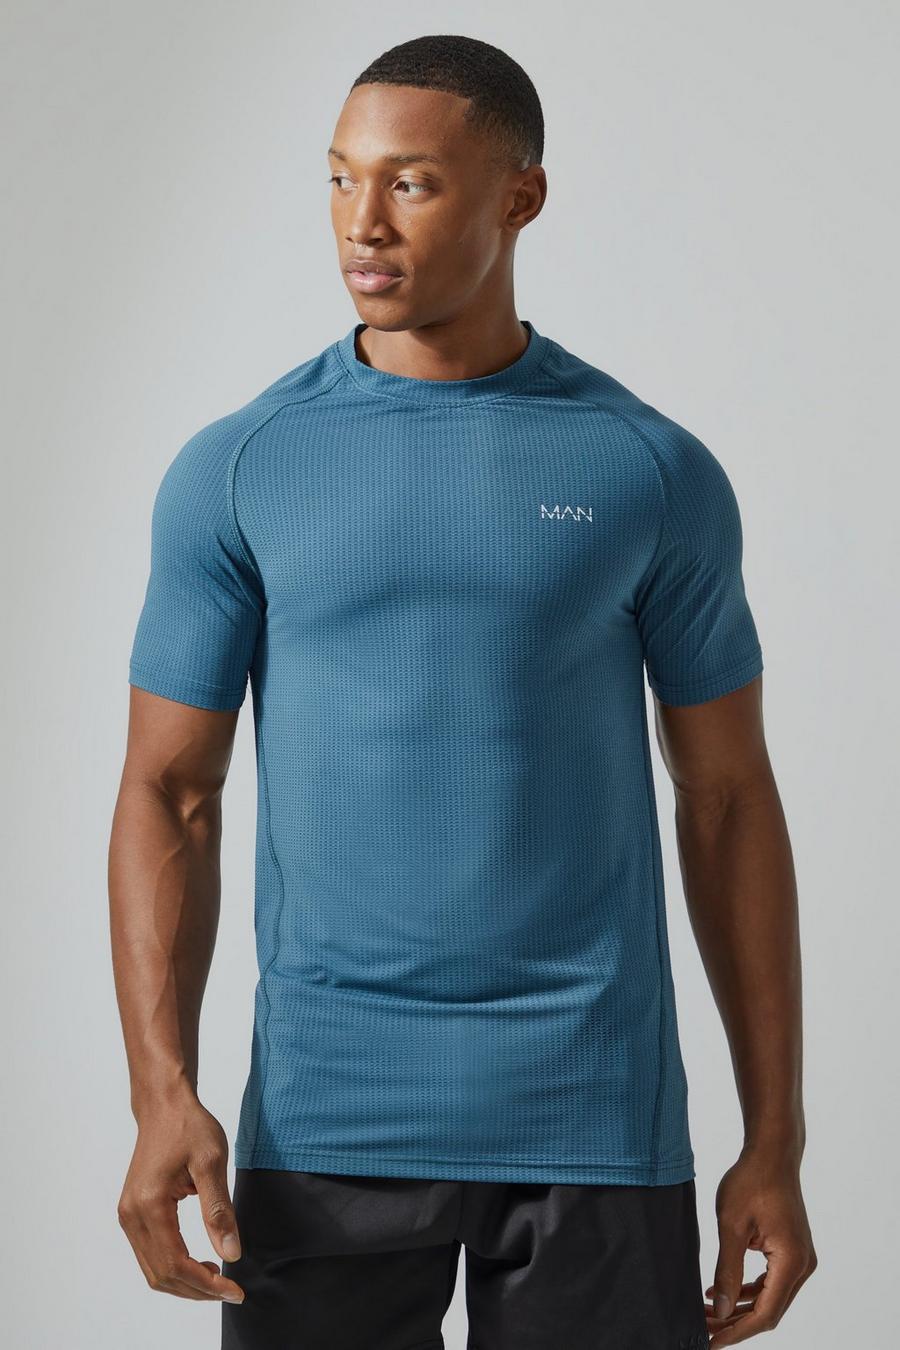 Teal Man Active Muscle Fit Marl T-shirt